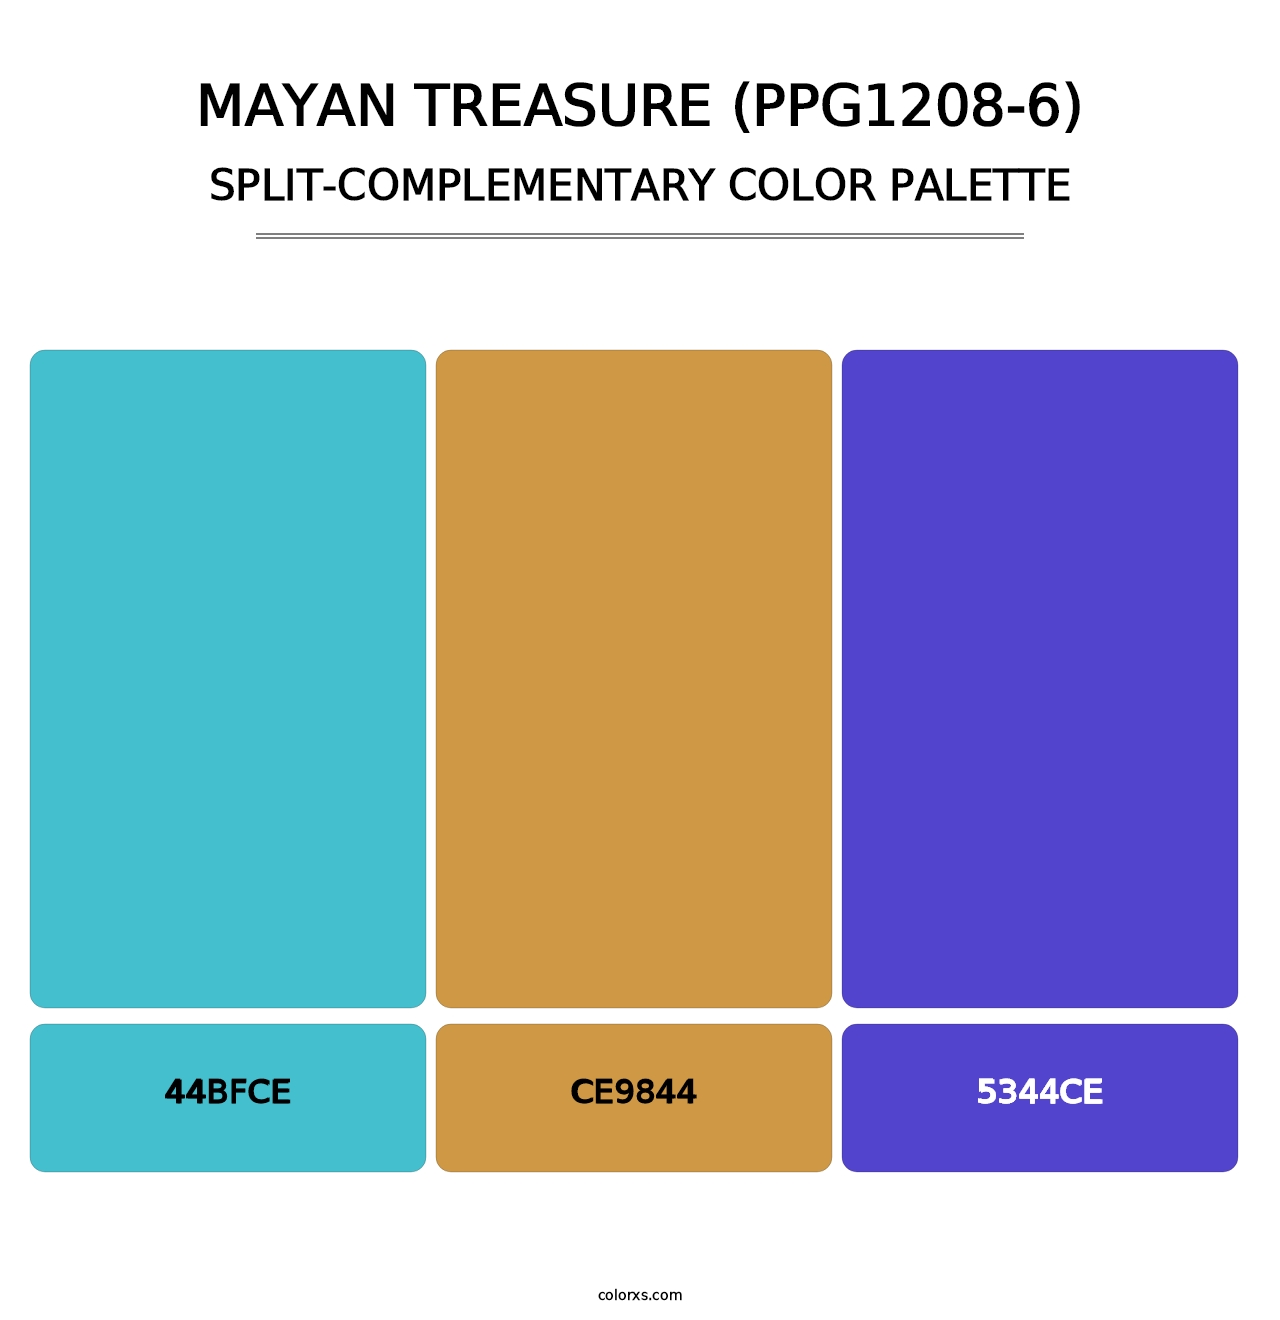 Mayan Treasure (PPG1208-6) - Split-Complementary Color Palette